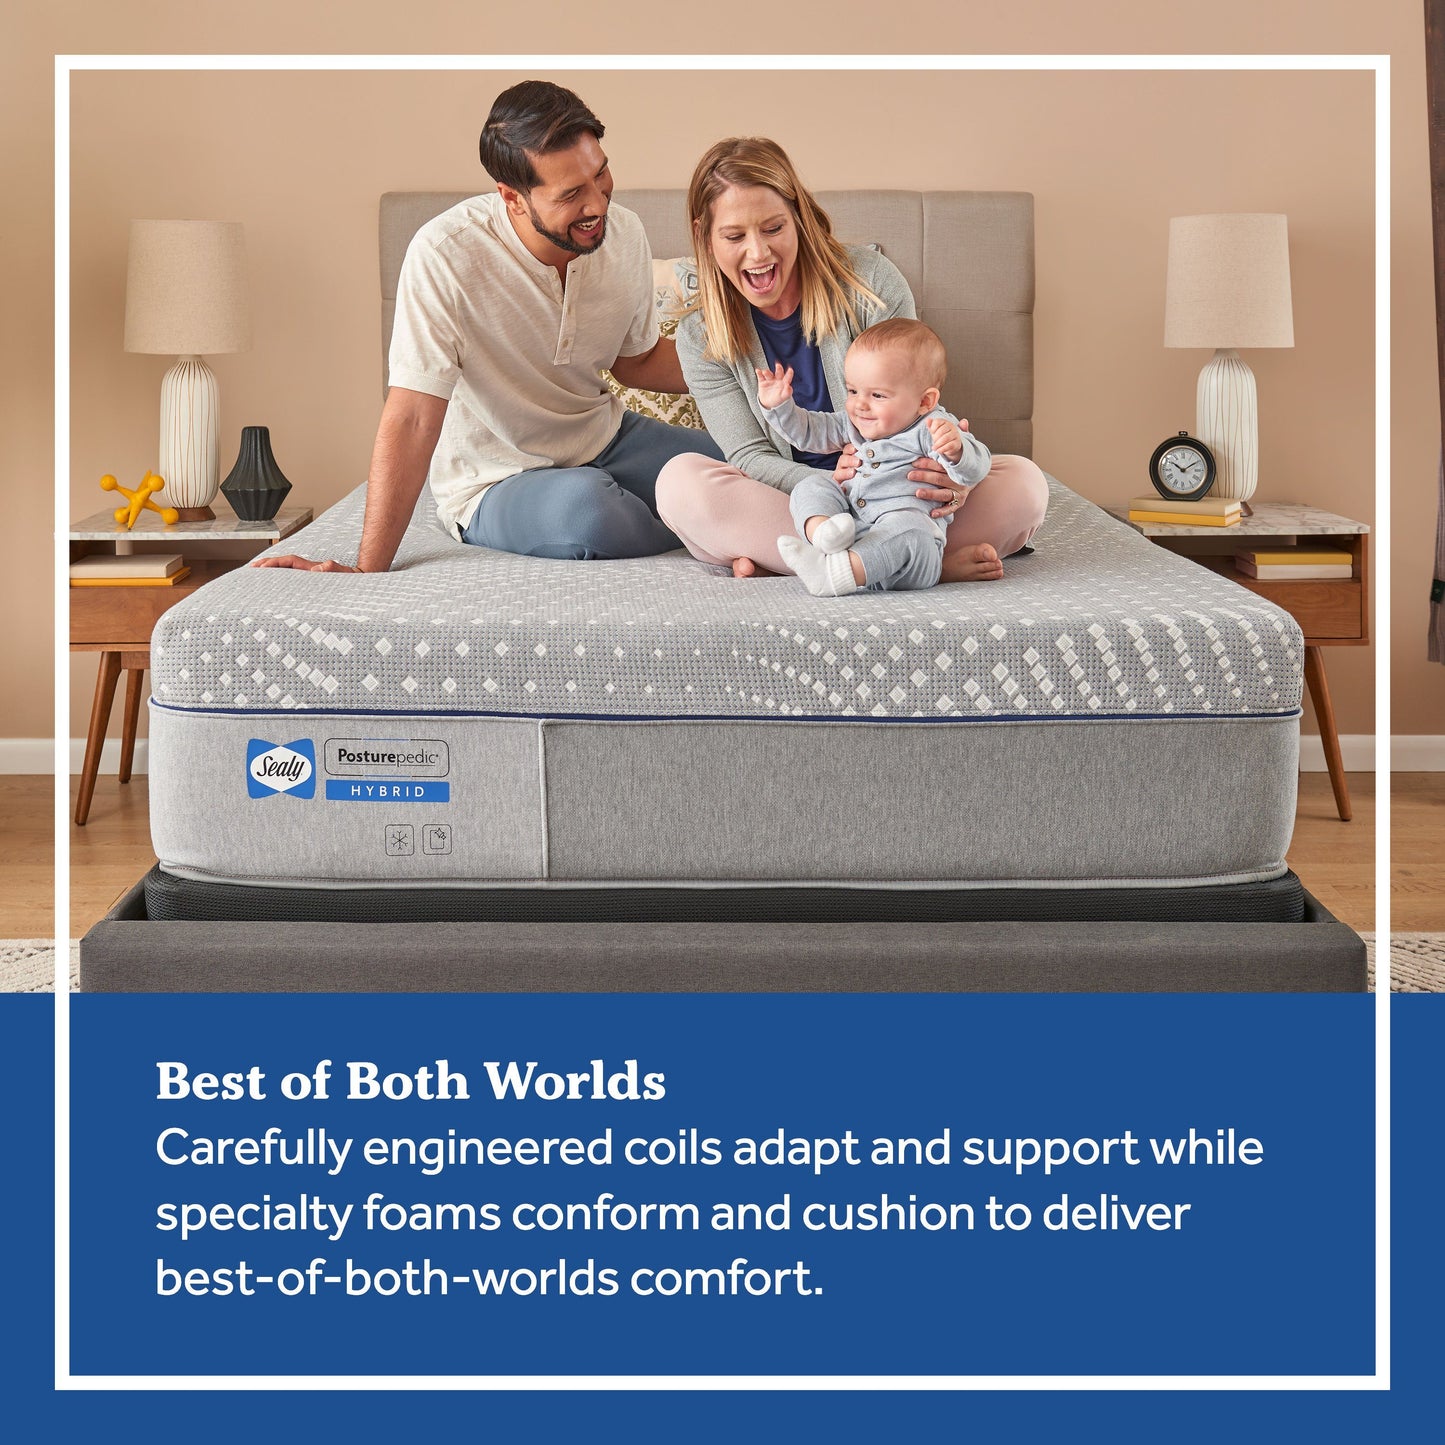 Sealy Hybrid Elstead Firm Mattress Features Guide